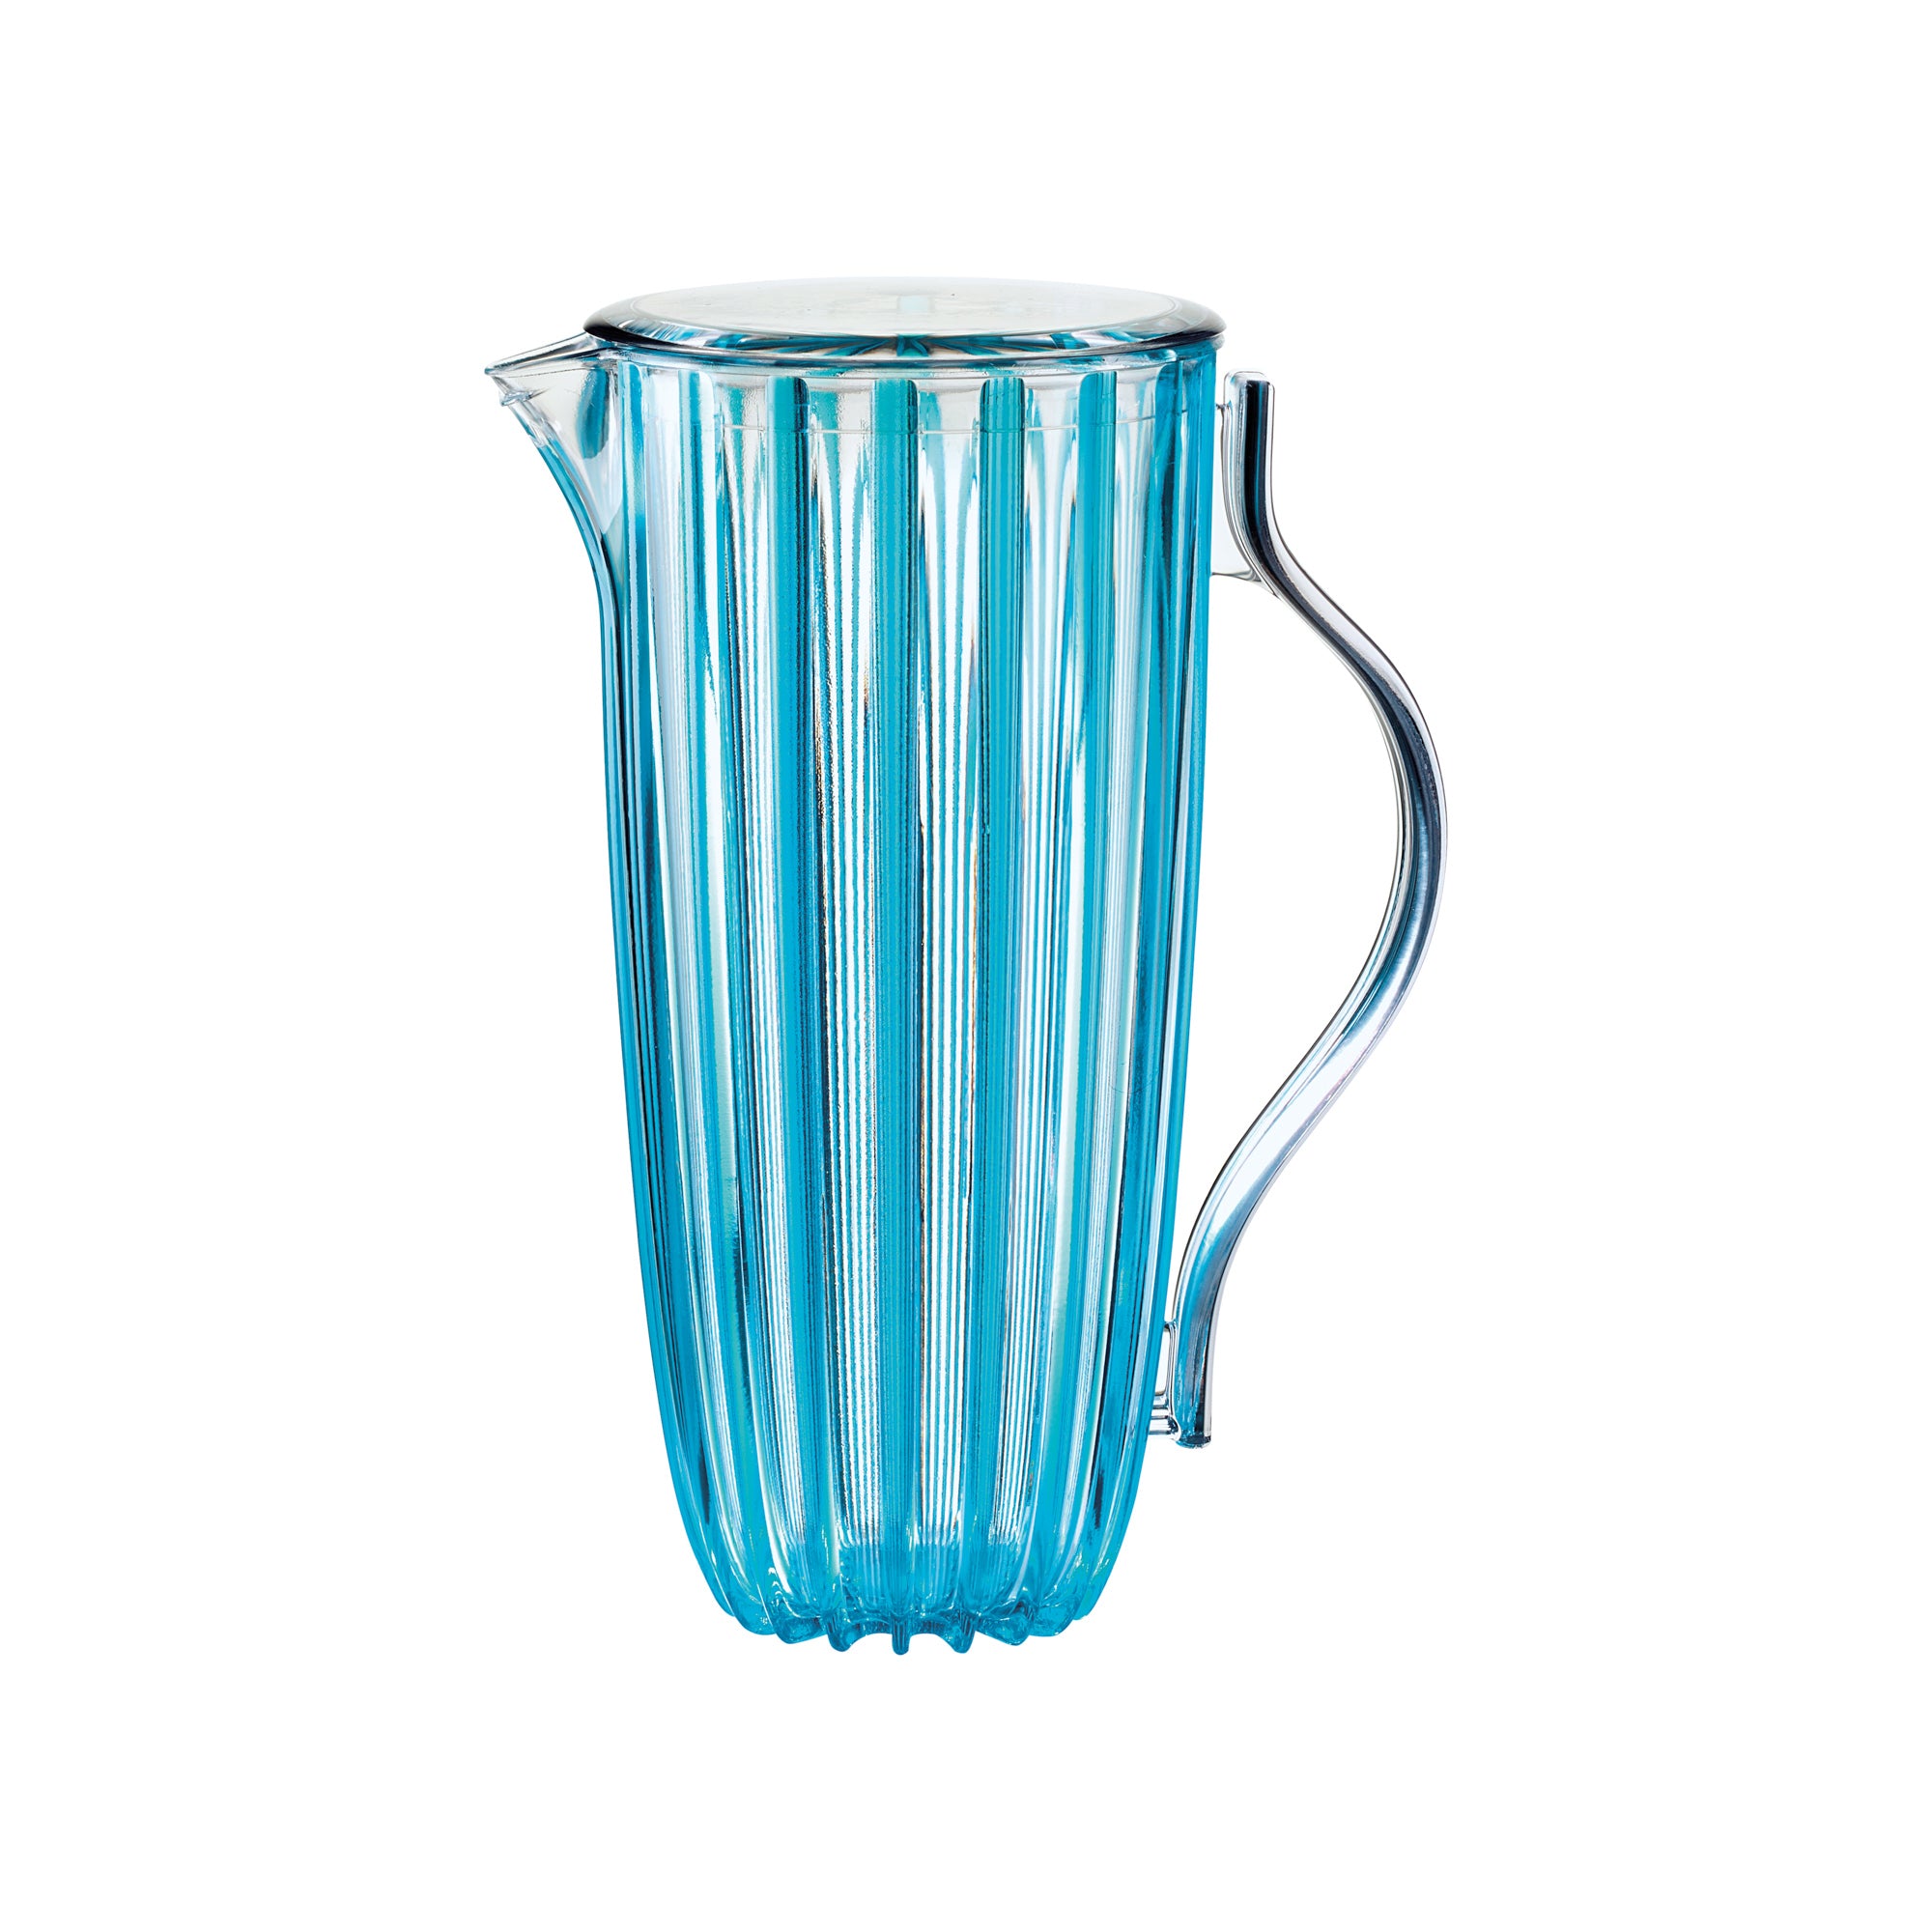 PITCHER WITH LID "DOLCEVITA" (ISCC+)